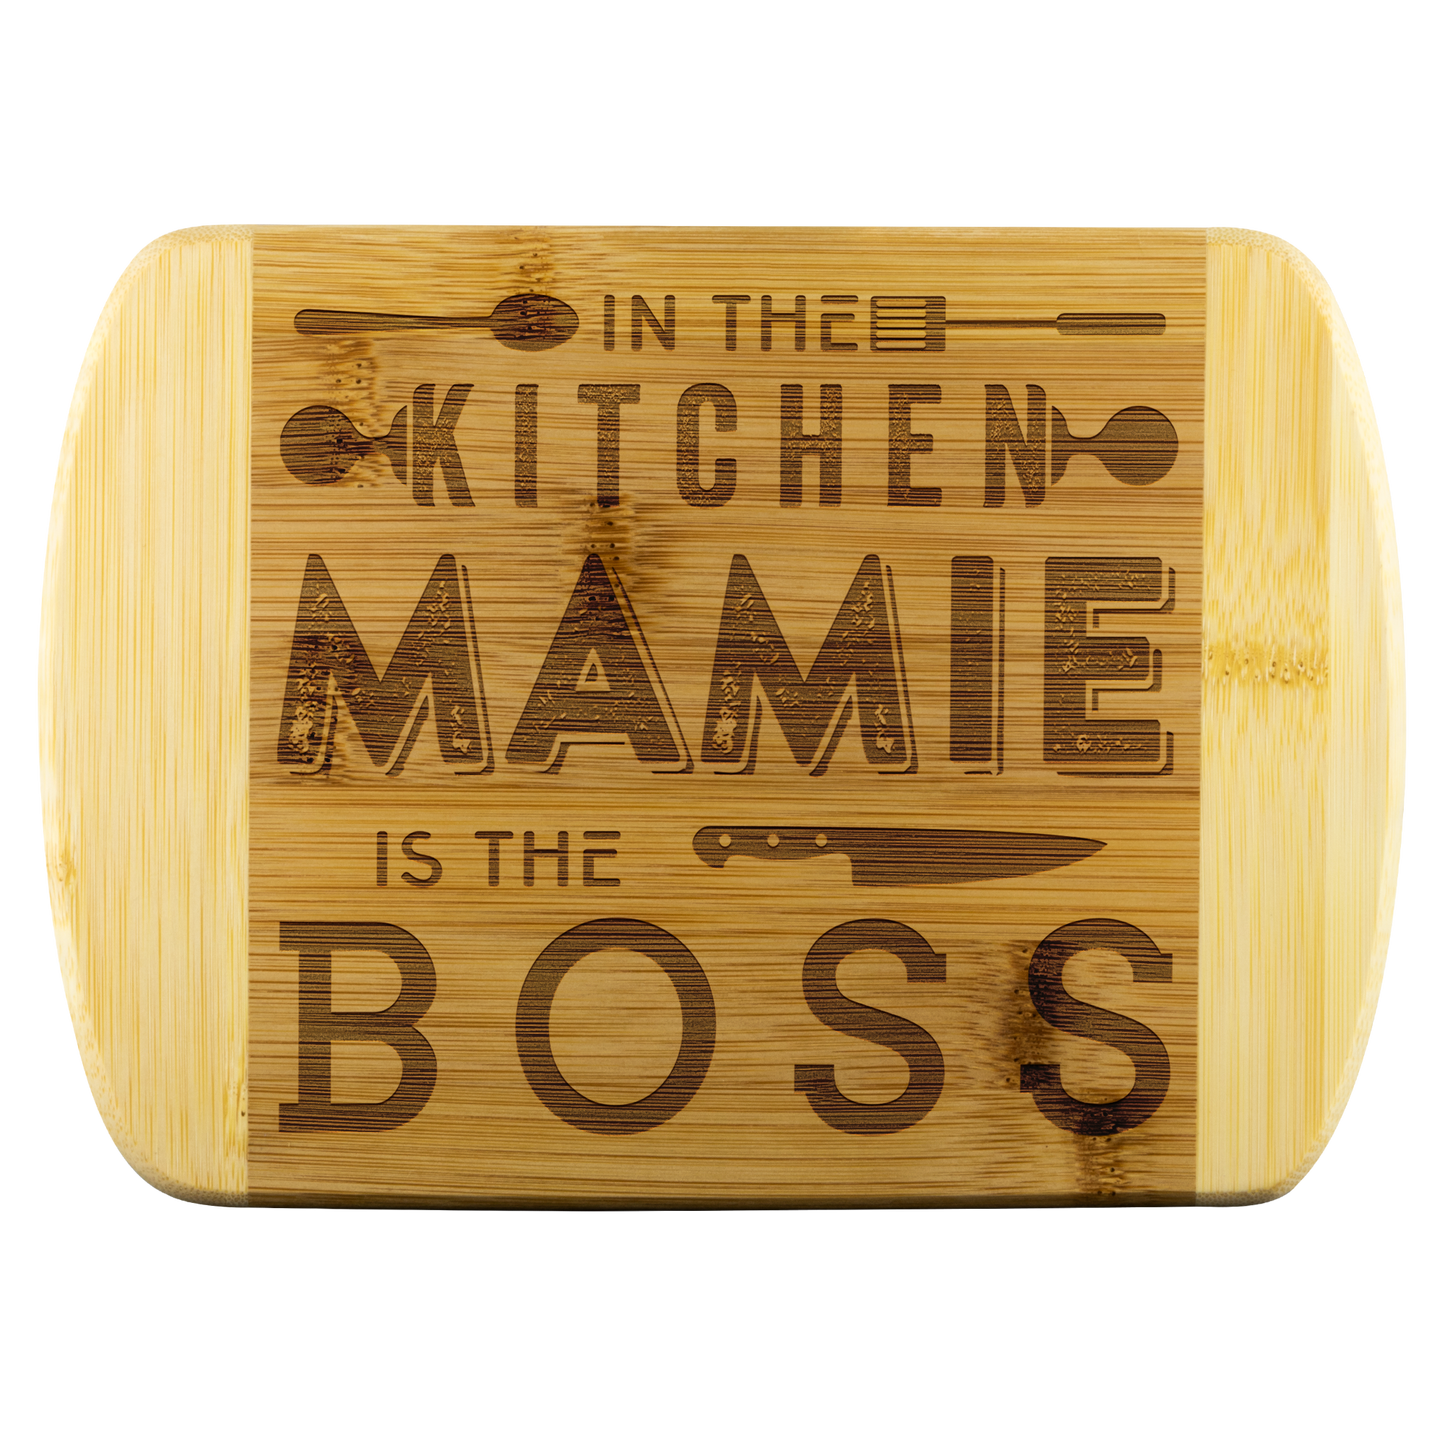 cub-20517122-sp-45757 - [ Mamie | 1 | 1 ] (TL_RoundEdgeWoodCuttingBoard) Mothers Day Gift Ideas - In The Kitchen Mamie Is The Boss -